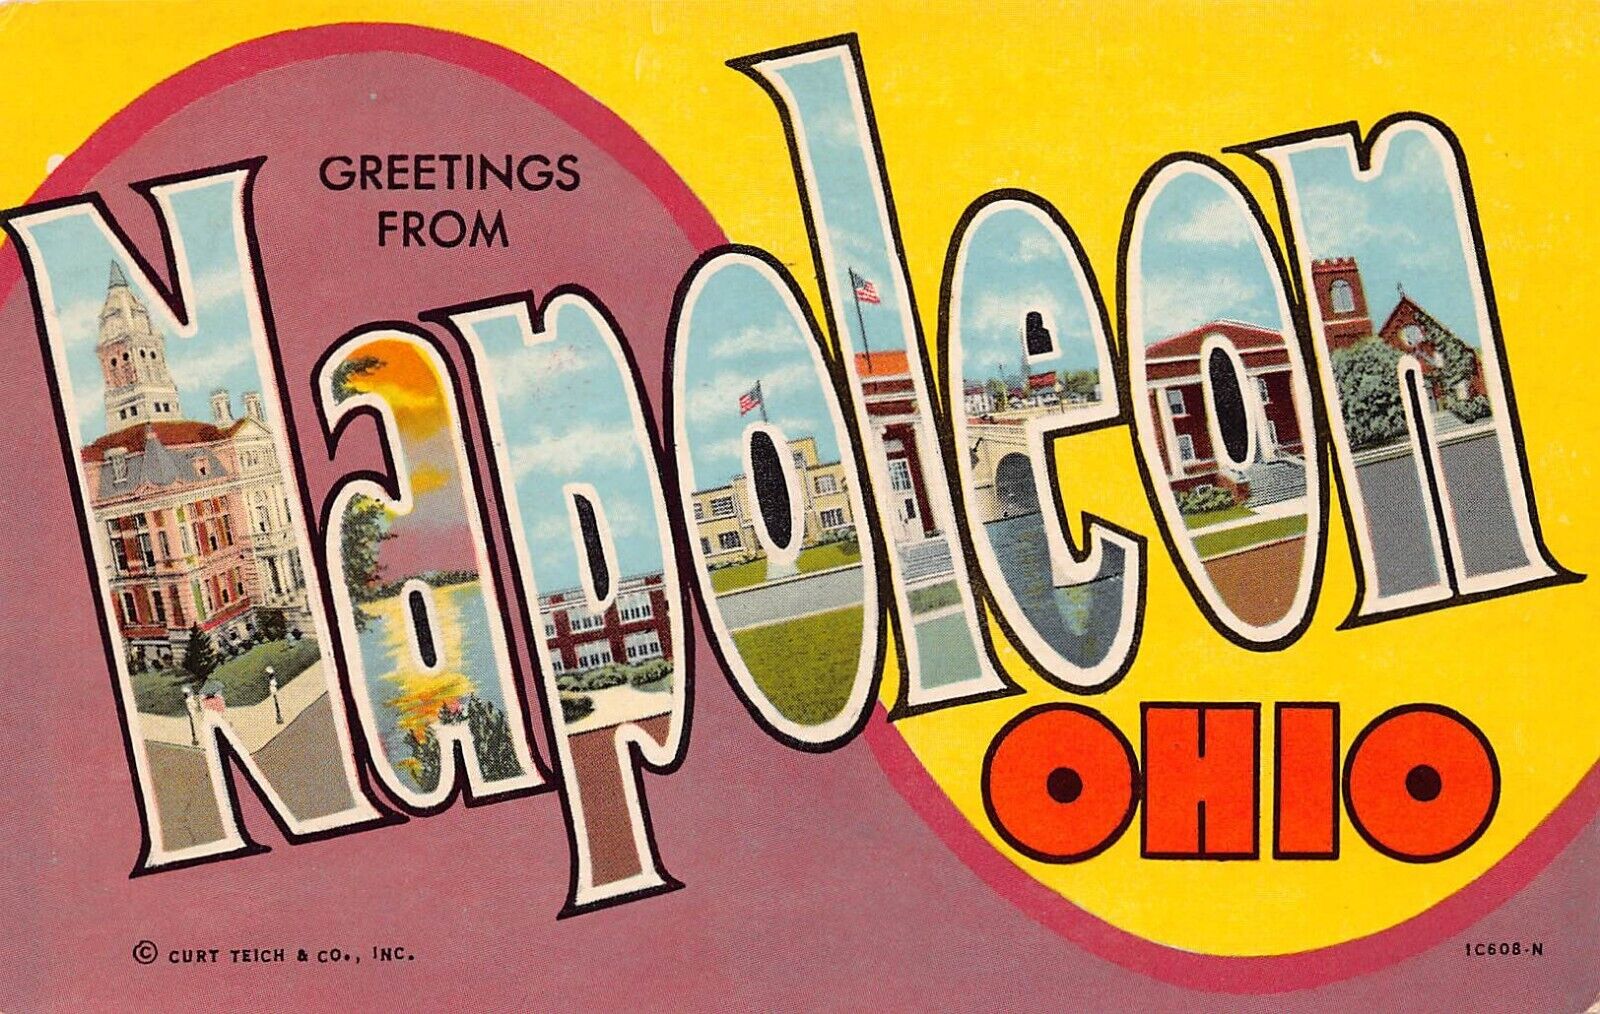 Napoleon Ohio OH Greetings From Large Letter Chrome 1C608-N Postcard